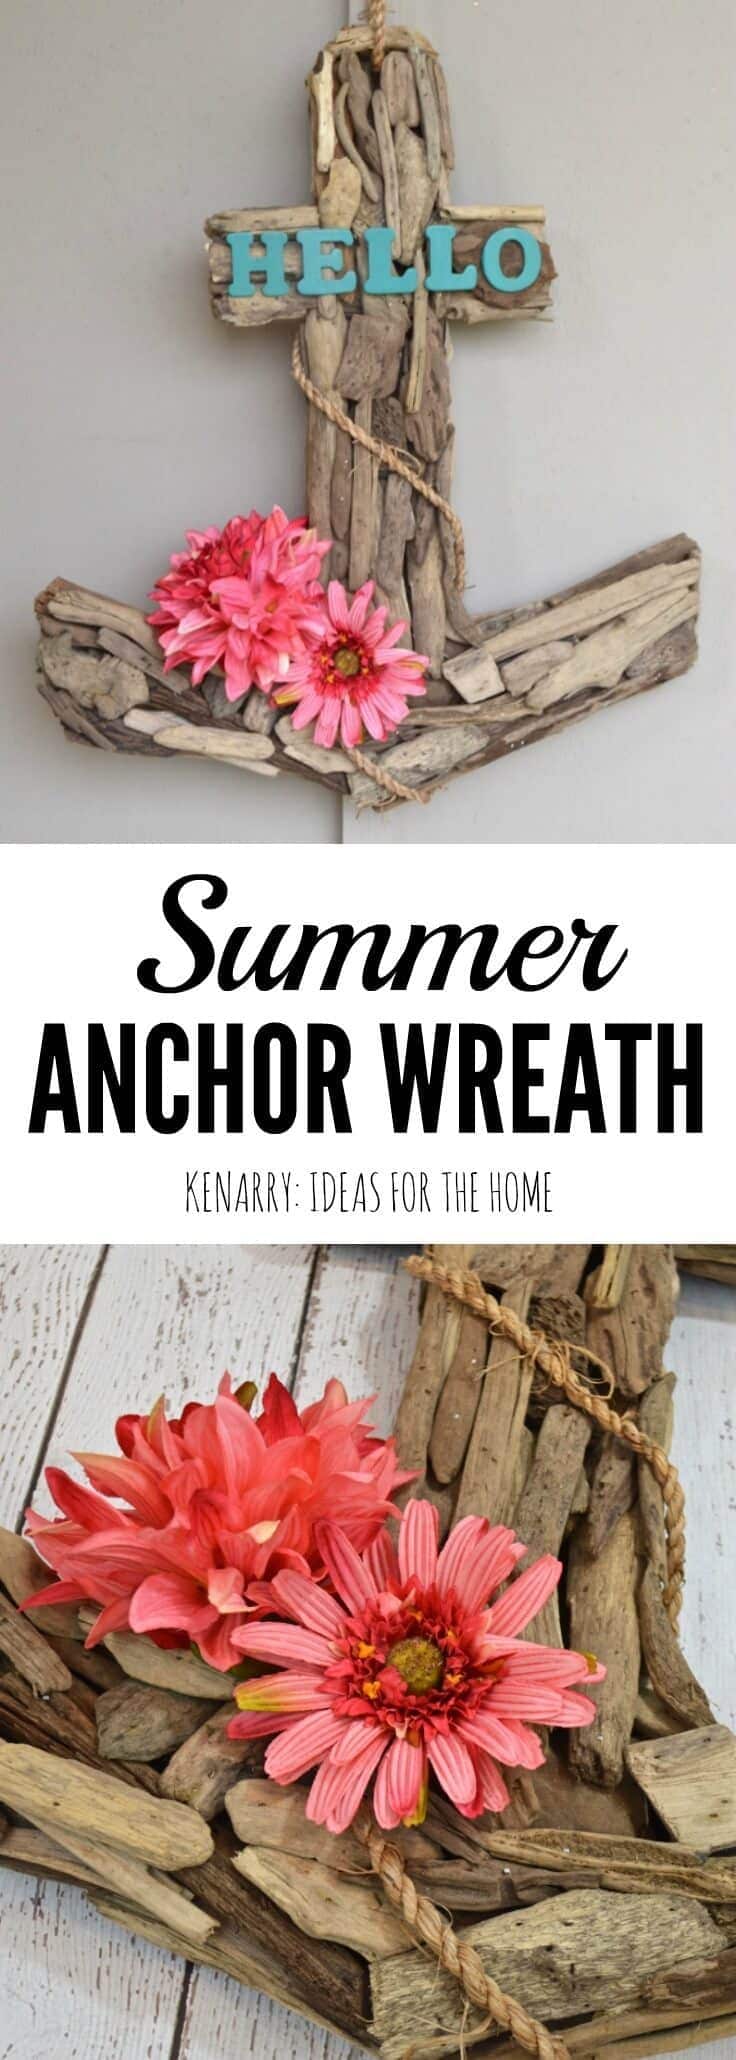 I love coastal or nautical style for home decor in the summer. This anchor wreath idea would look great by the front door - indoor or outdoor!